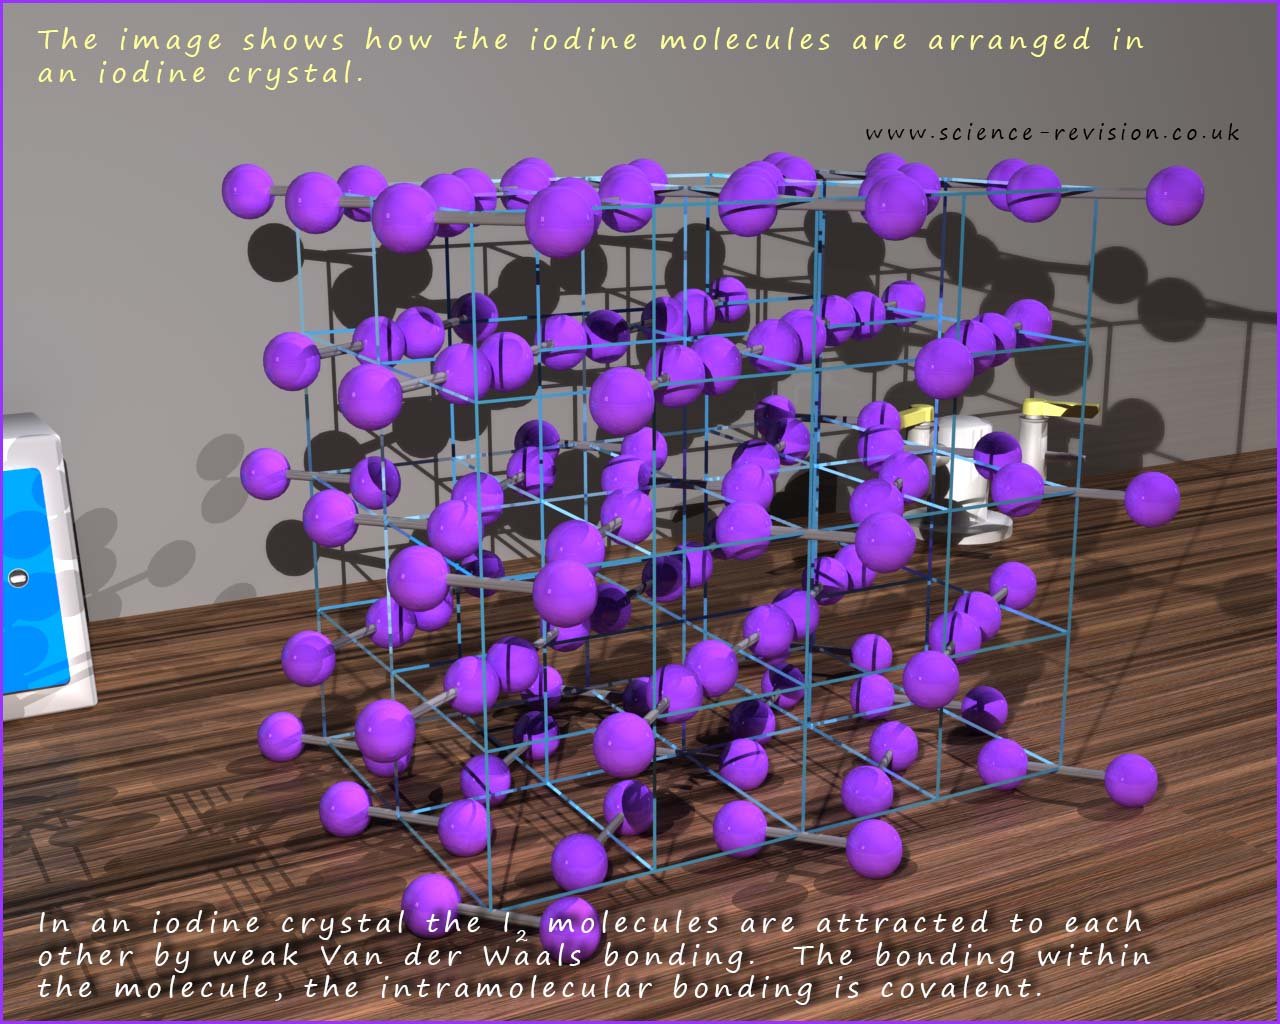 3d model showing the structure of an iodine crystal.